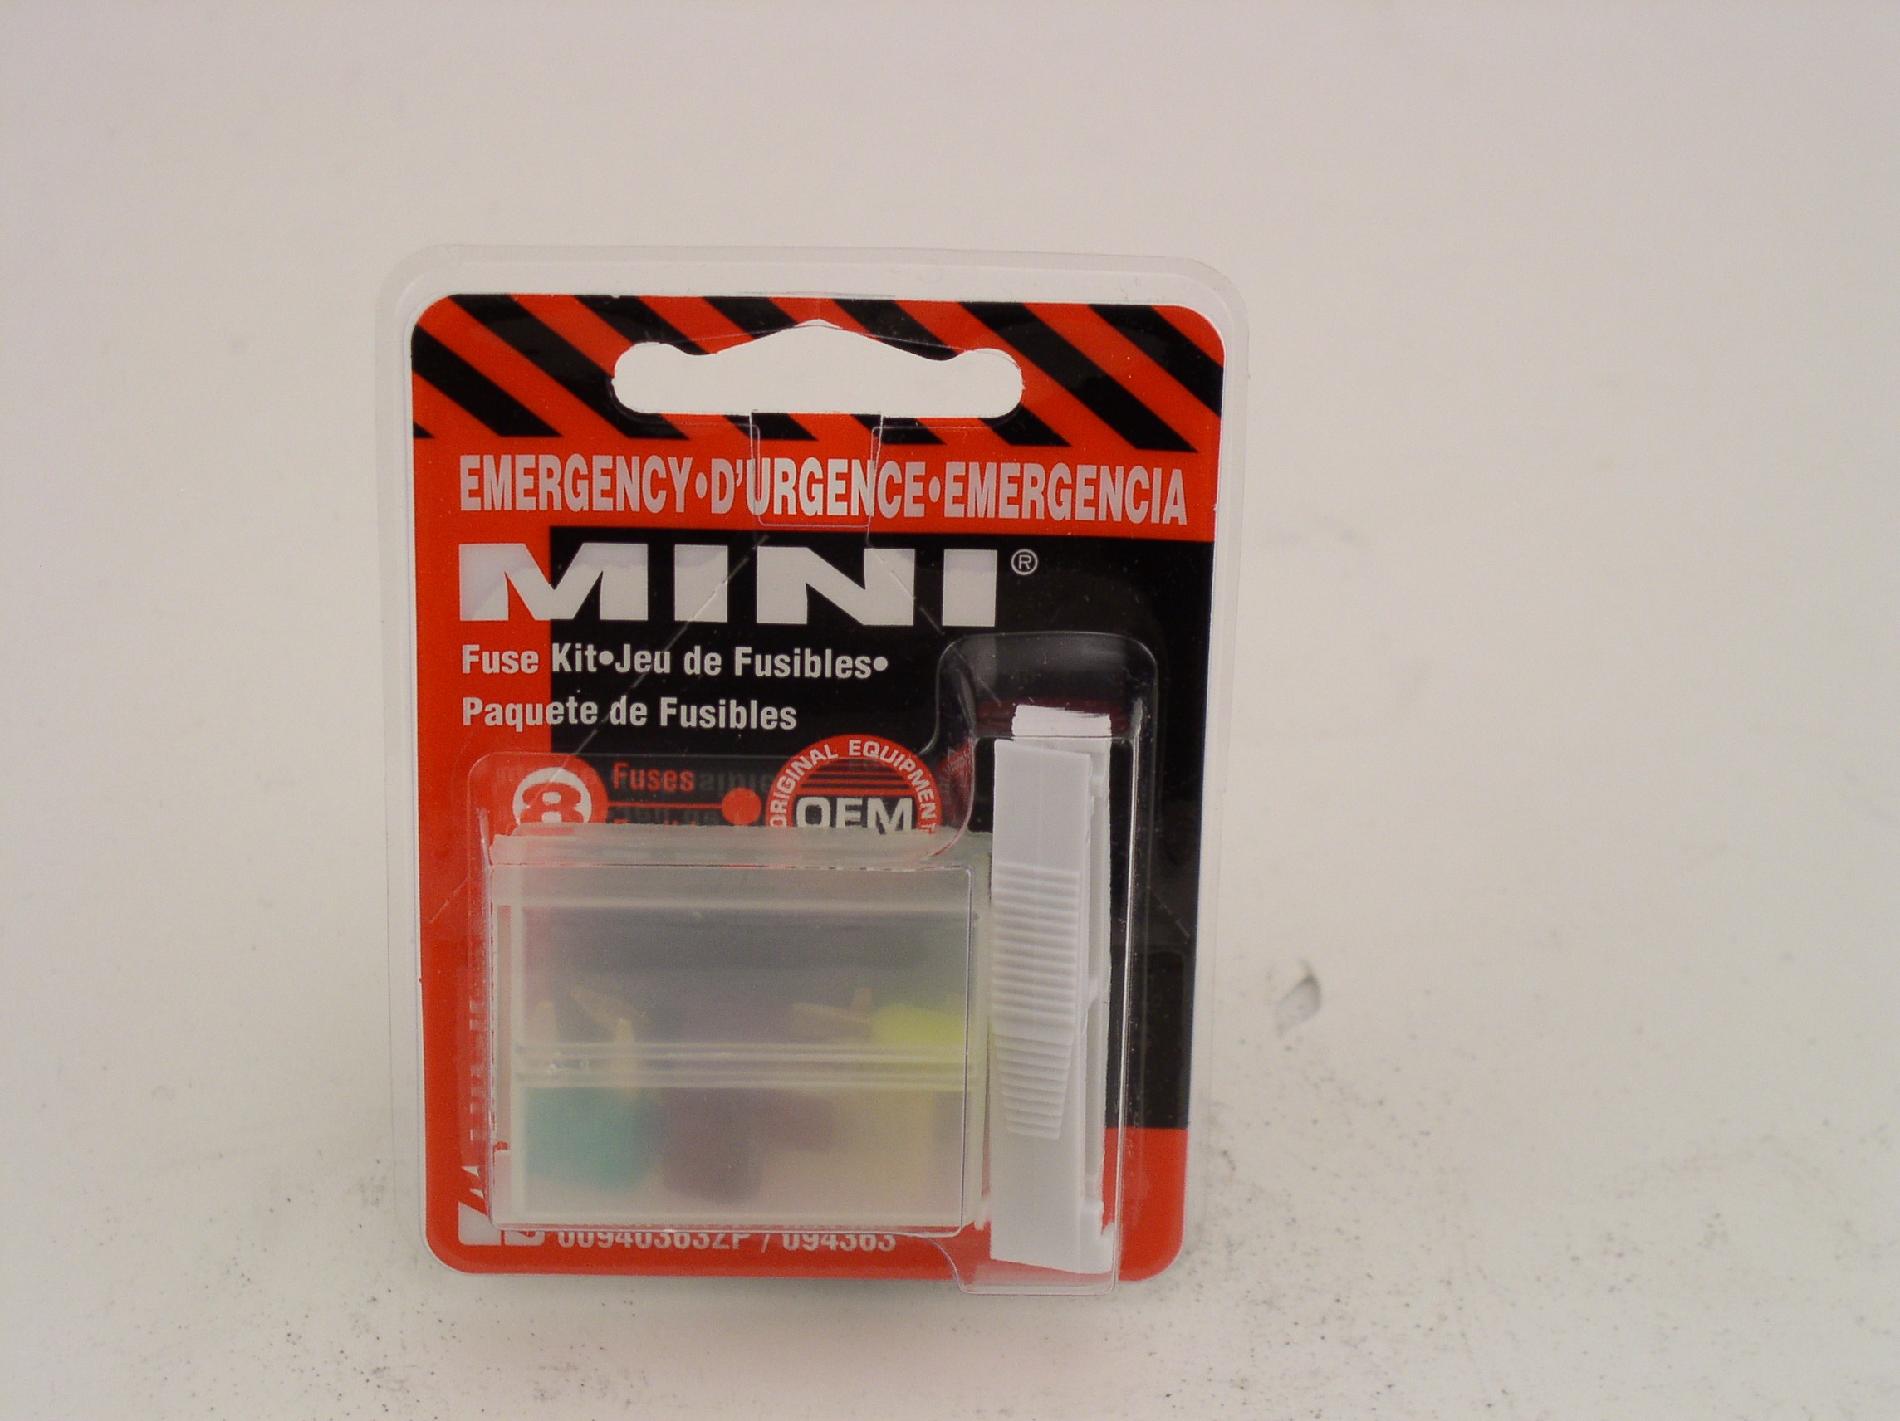 Mini ATO Fuse 8 pc Emergency kit with fuse extractor